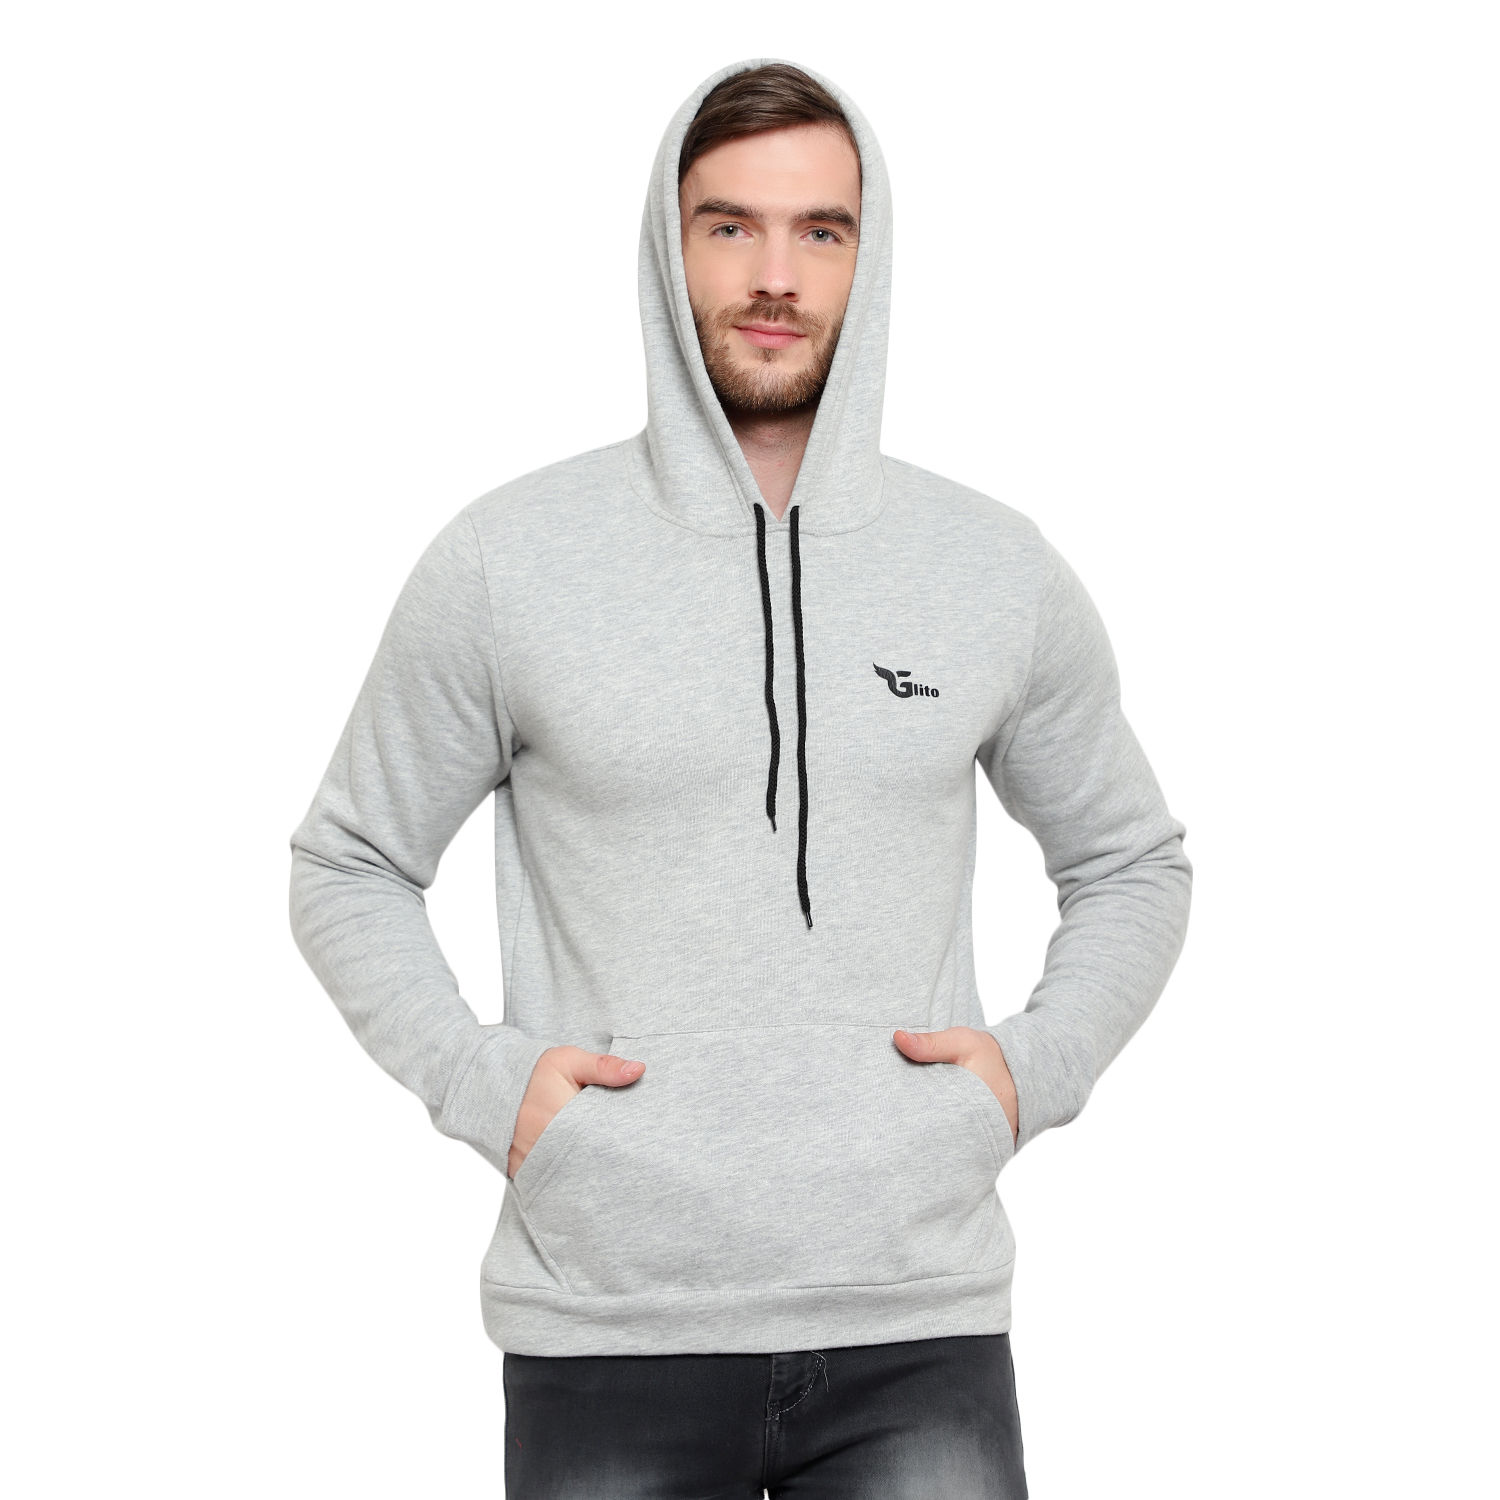 Buy Glito Solid Grey Hooded Full Sleeve With Side Pocket Sweat Shirt ...